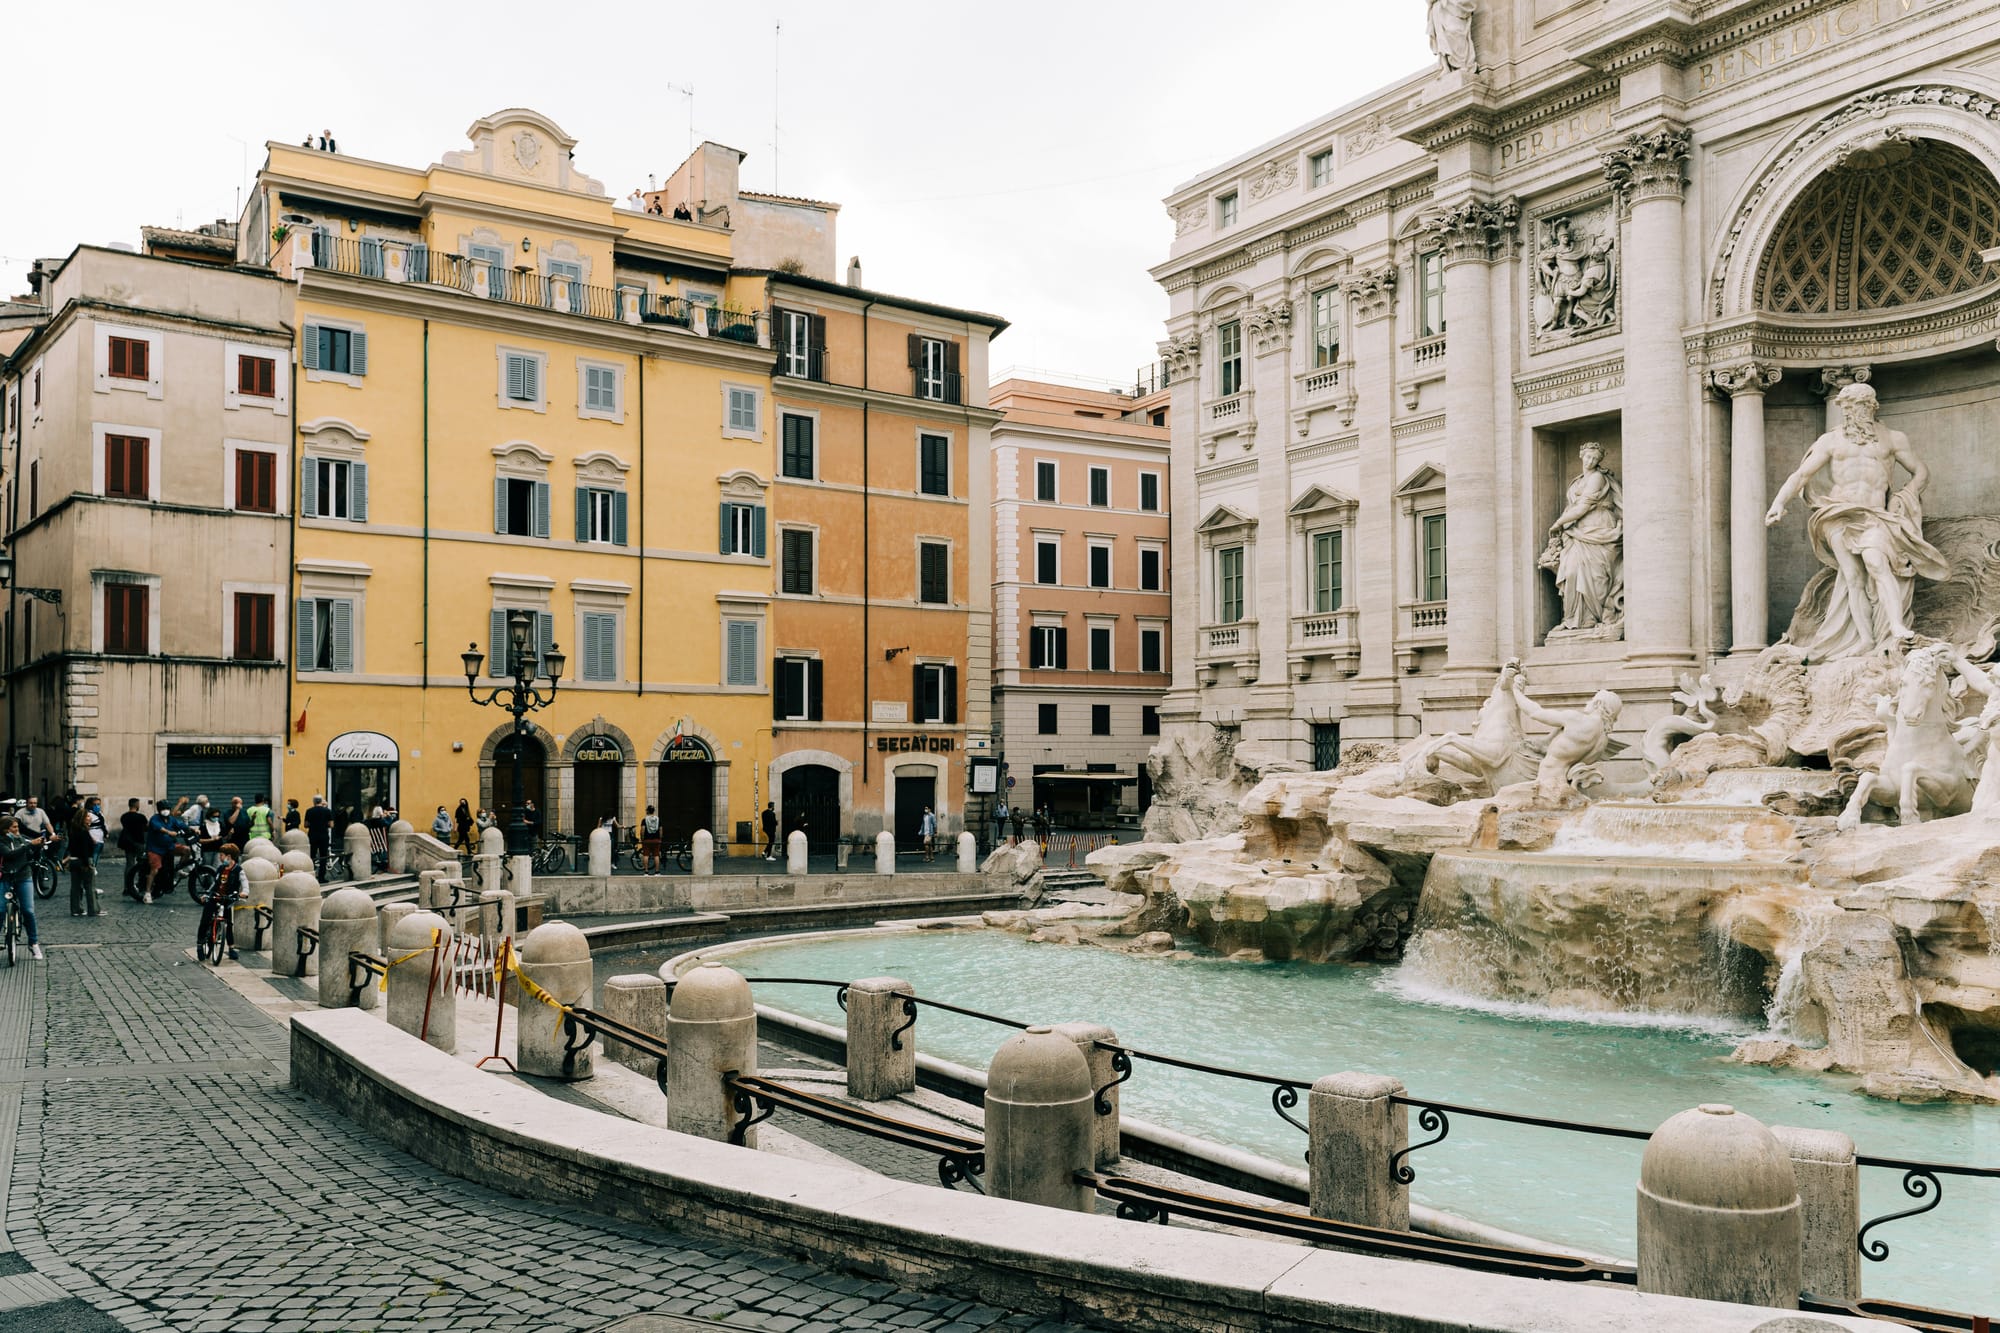 Trevi Fountain - an accessible attraction in Rome